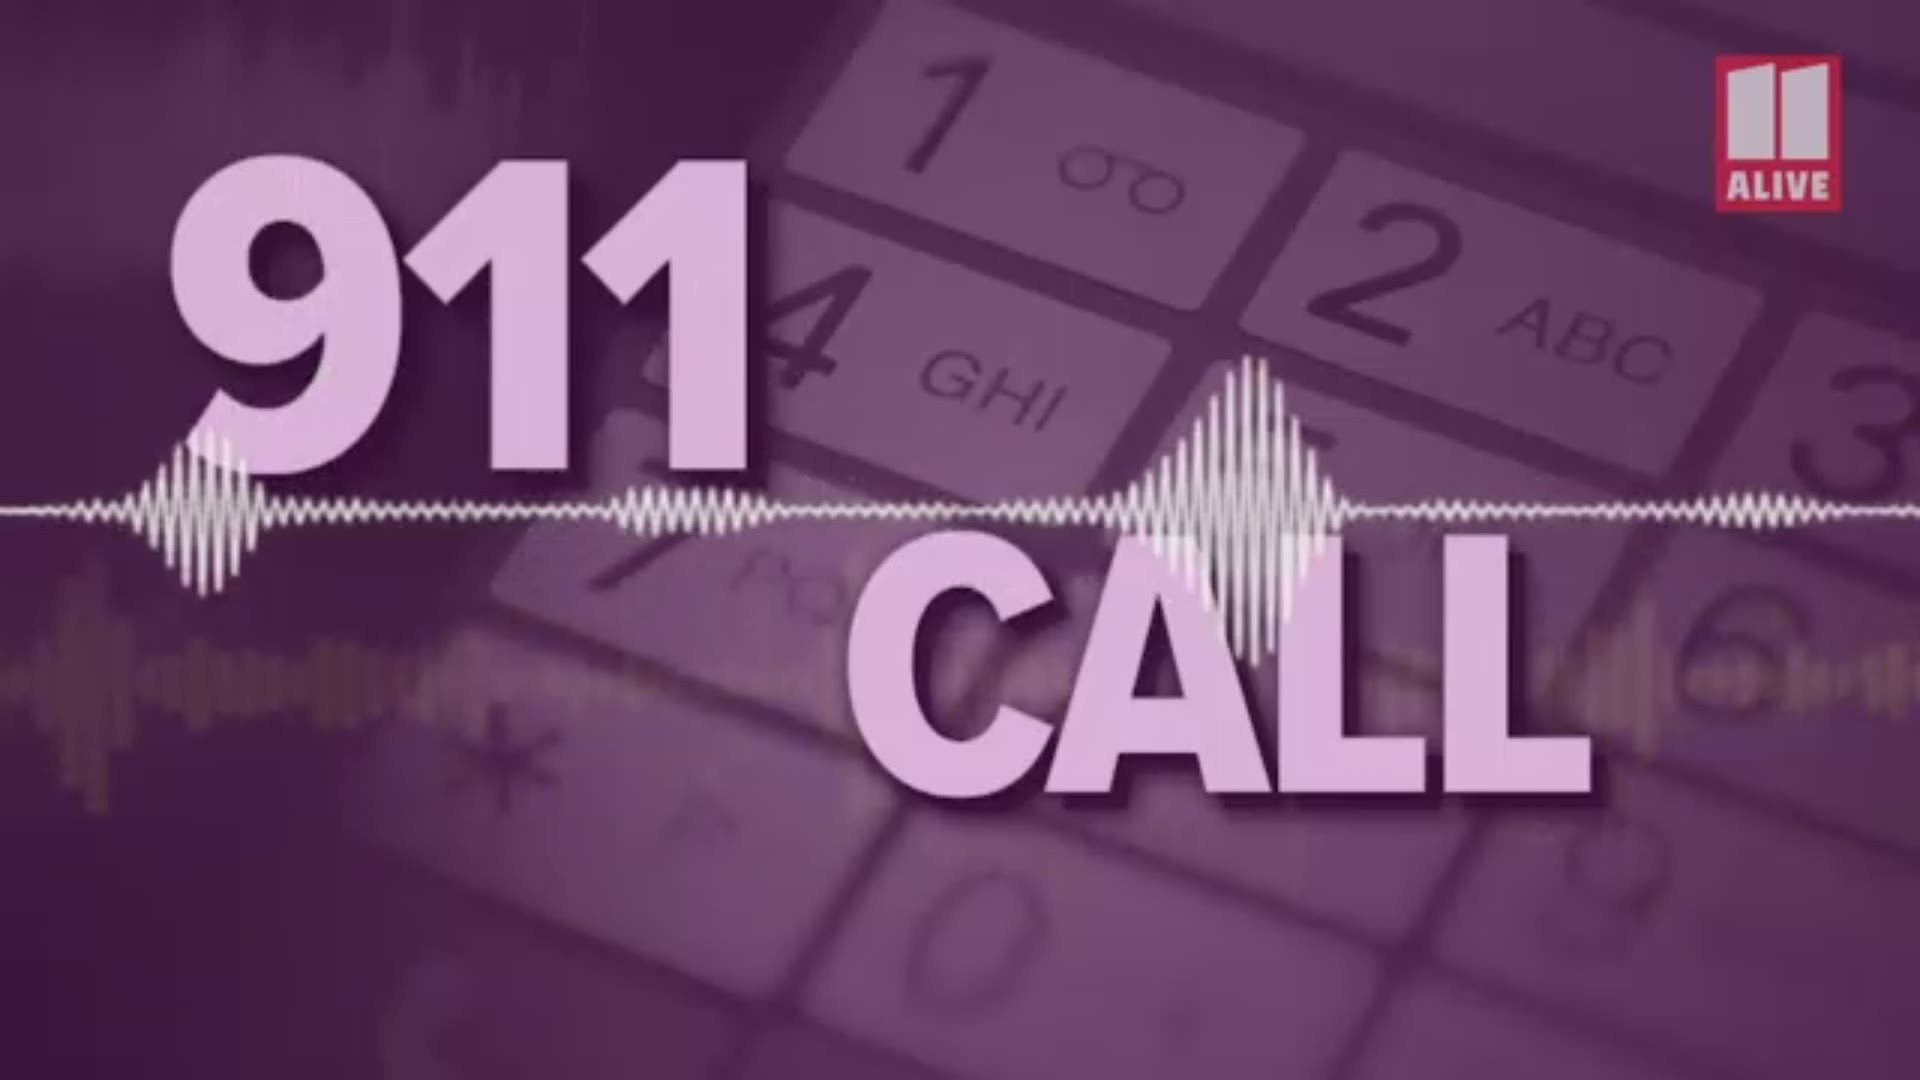 The caller frantically dialed 911 for help after discovering the newborn in the early morning hours.